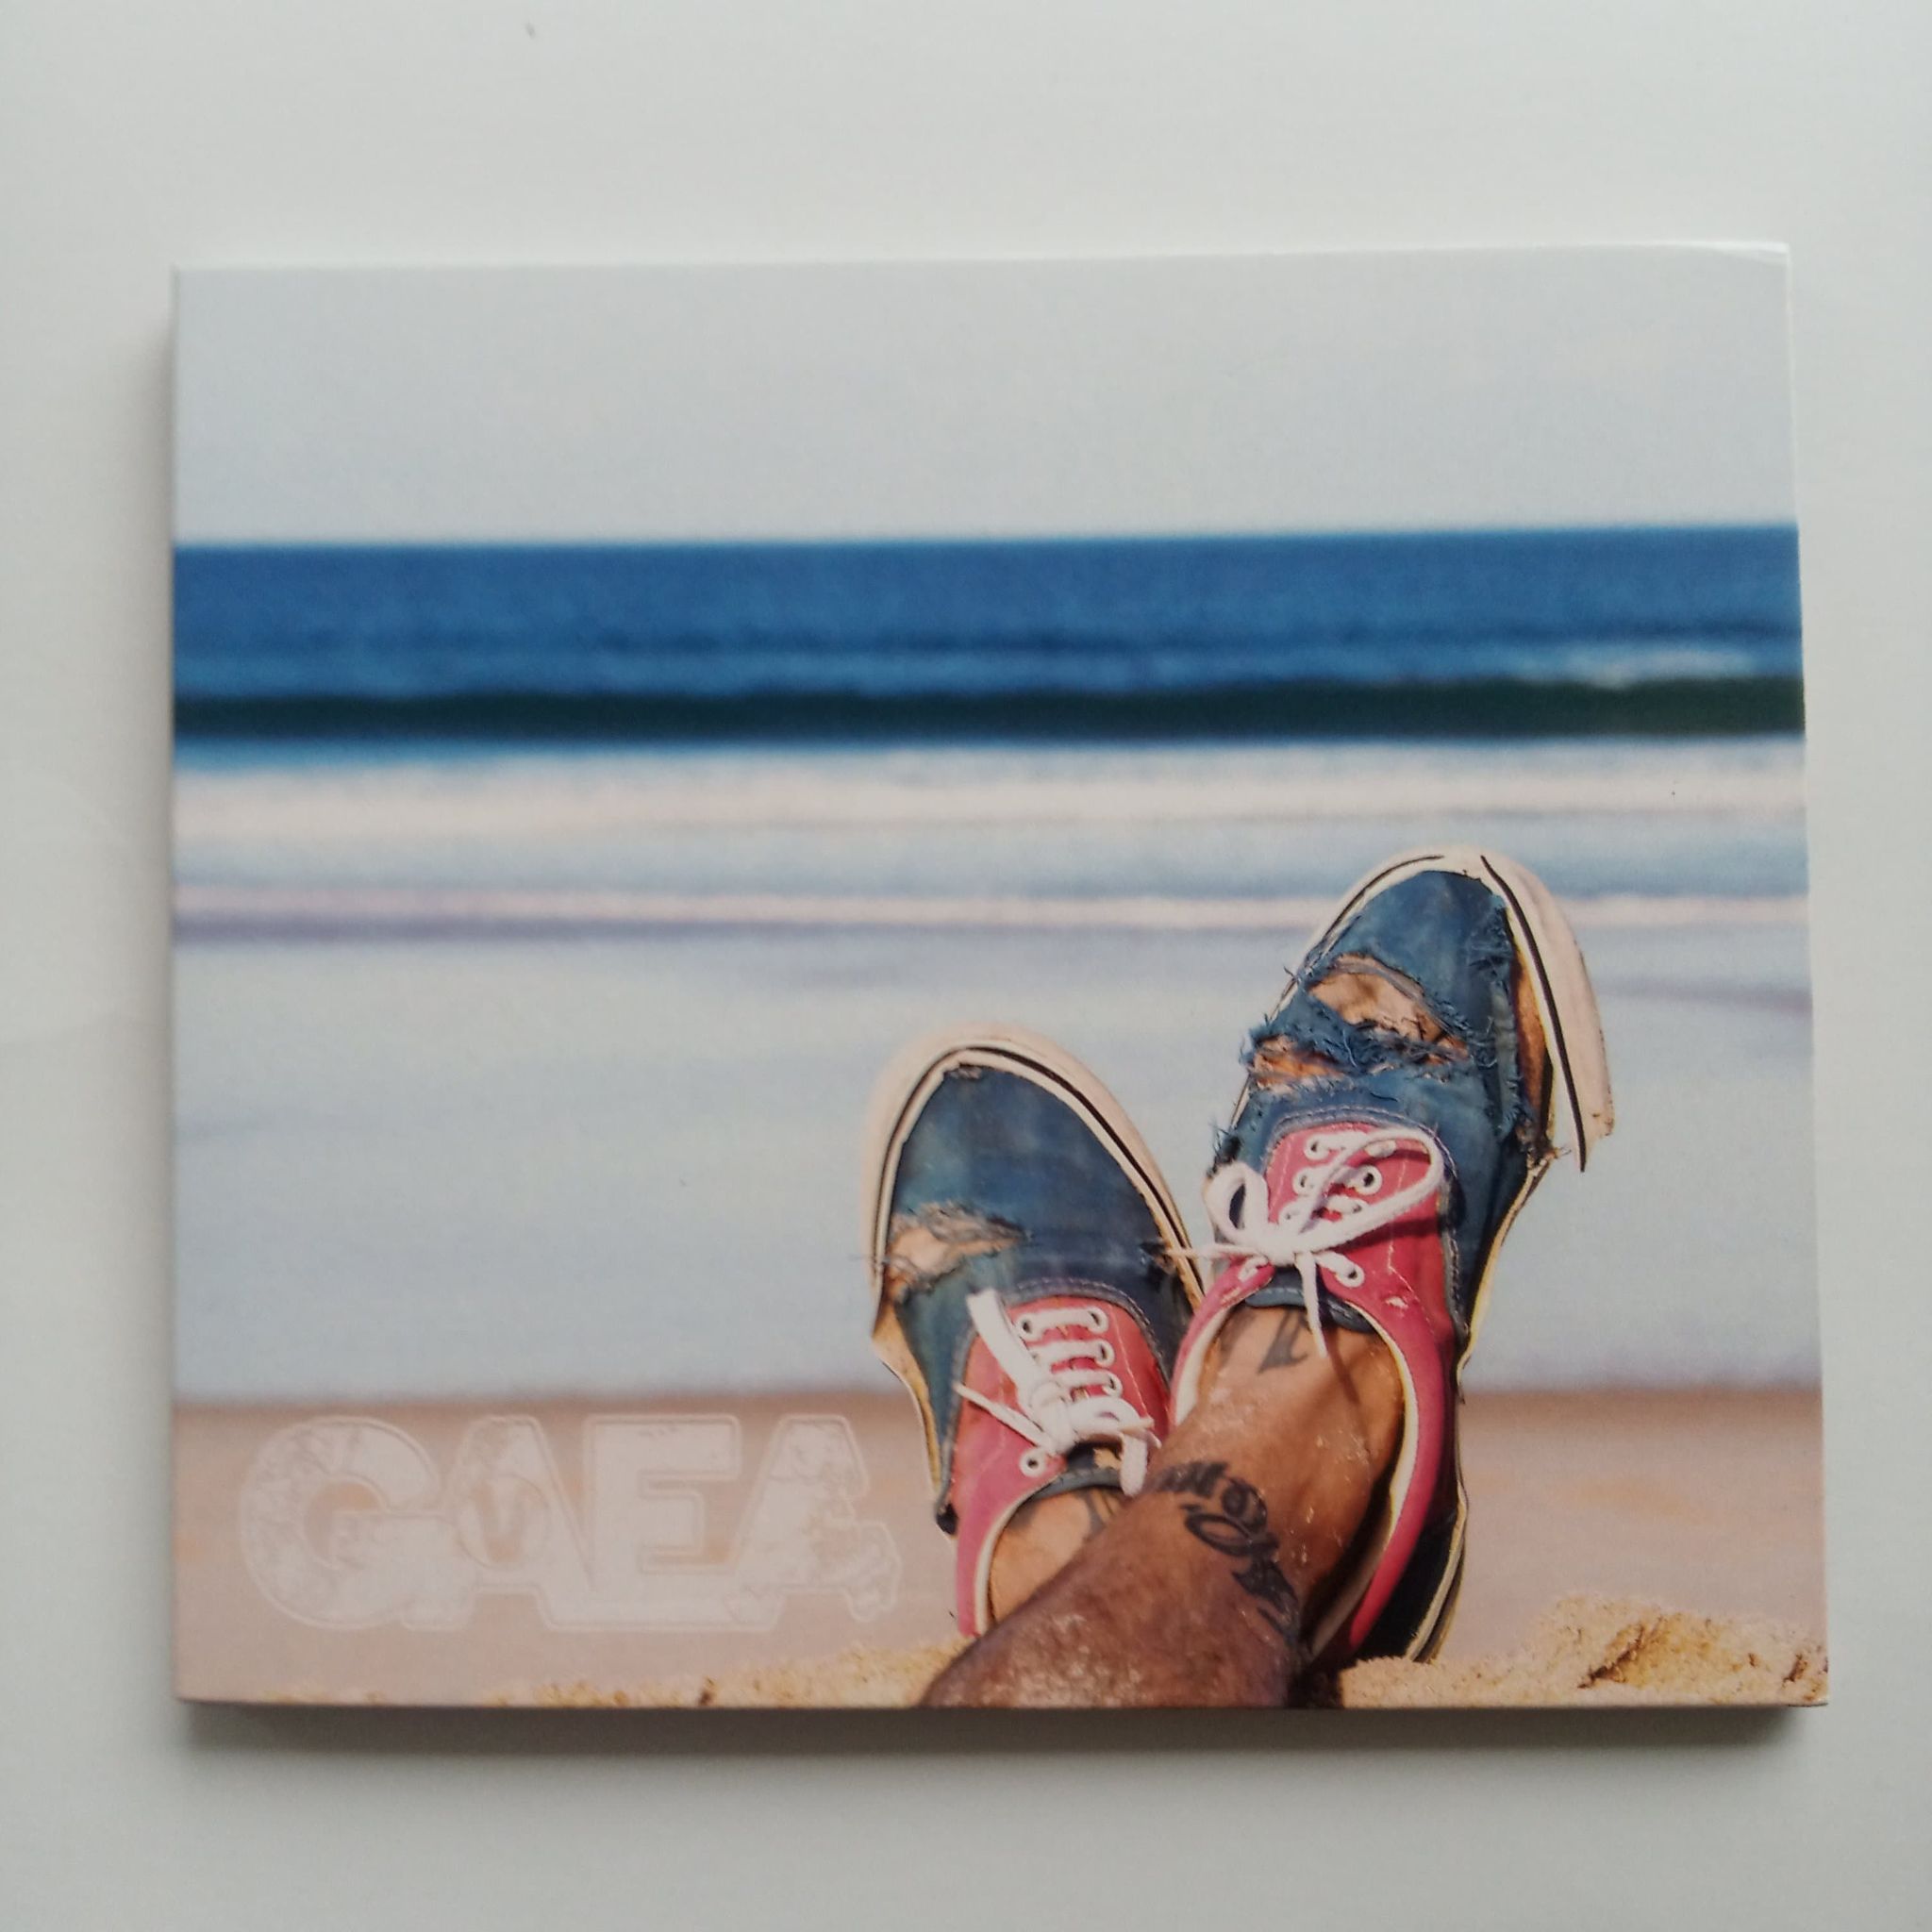 GAEA My Shoes CD front